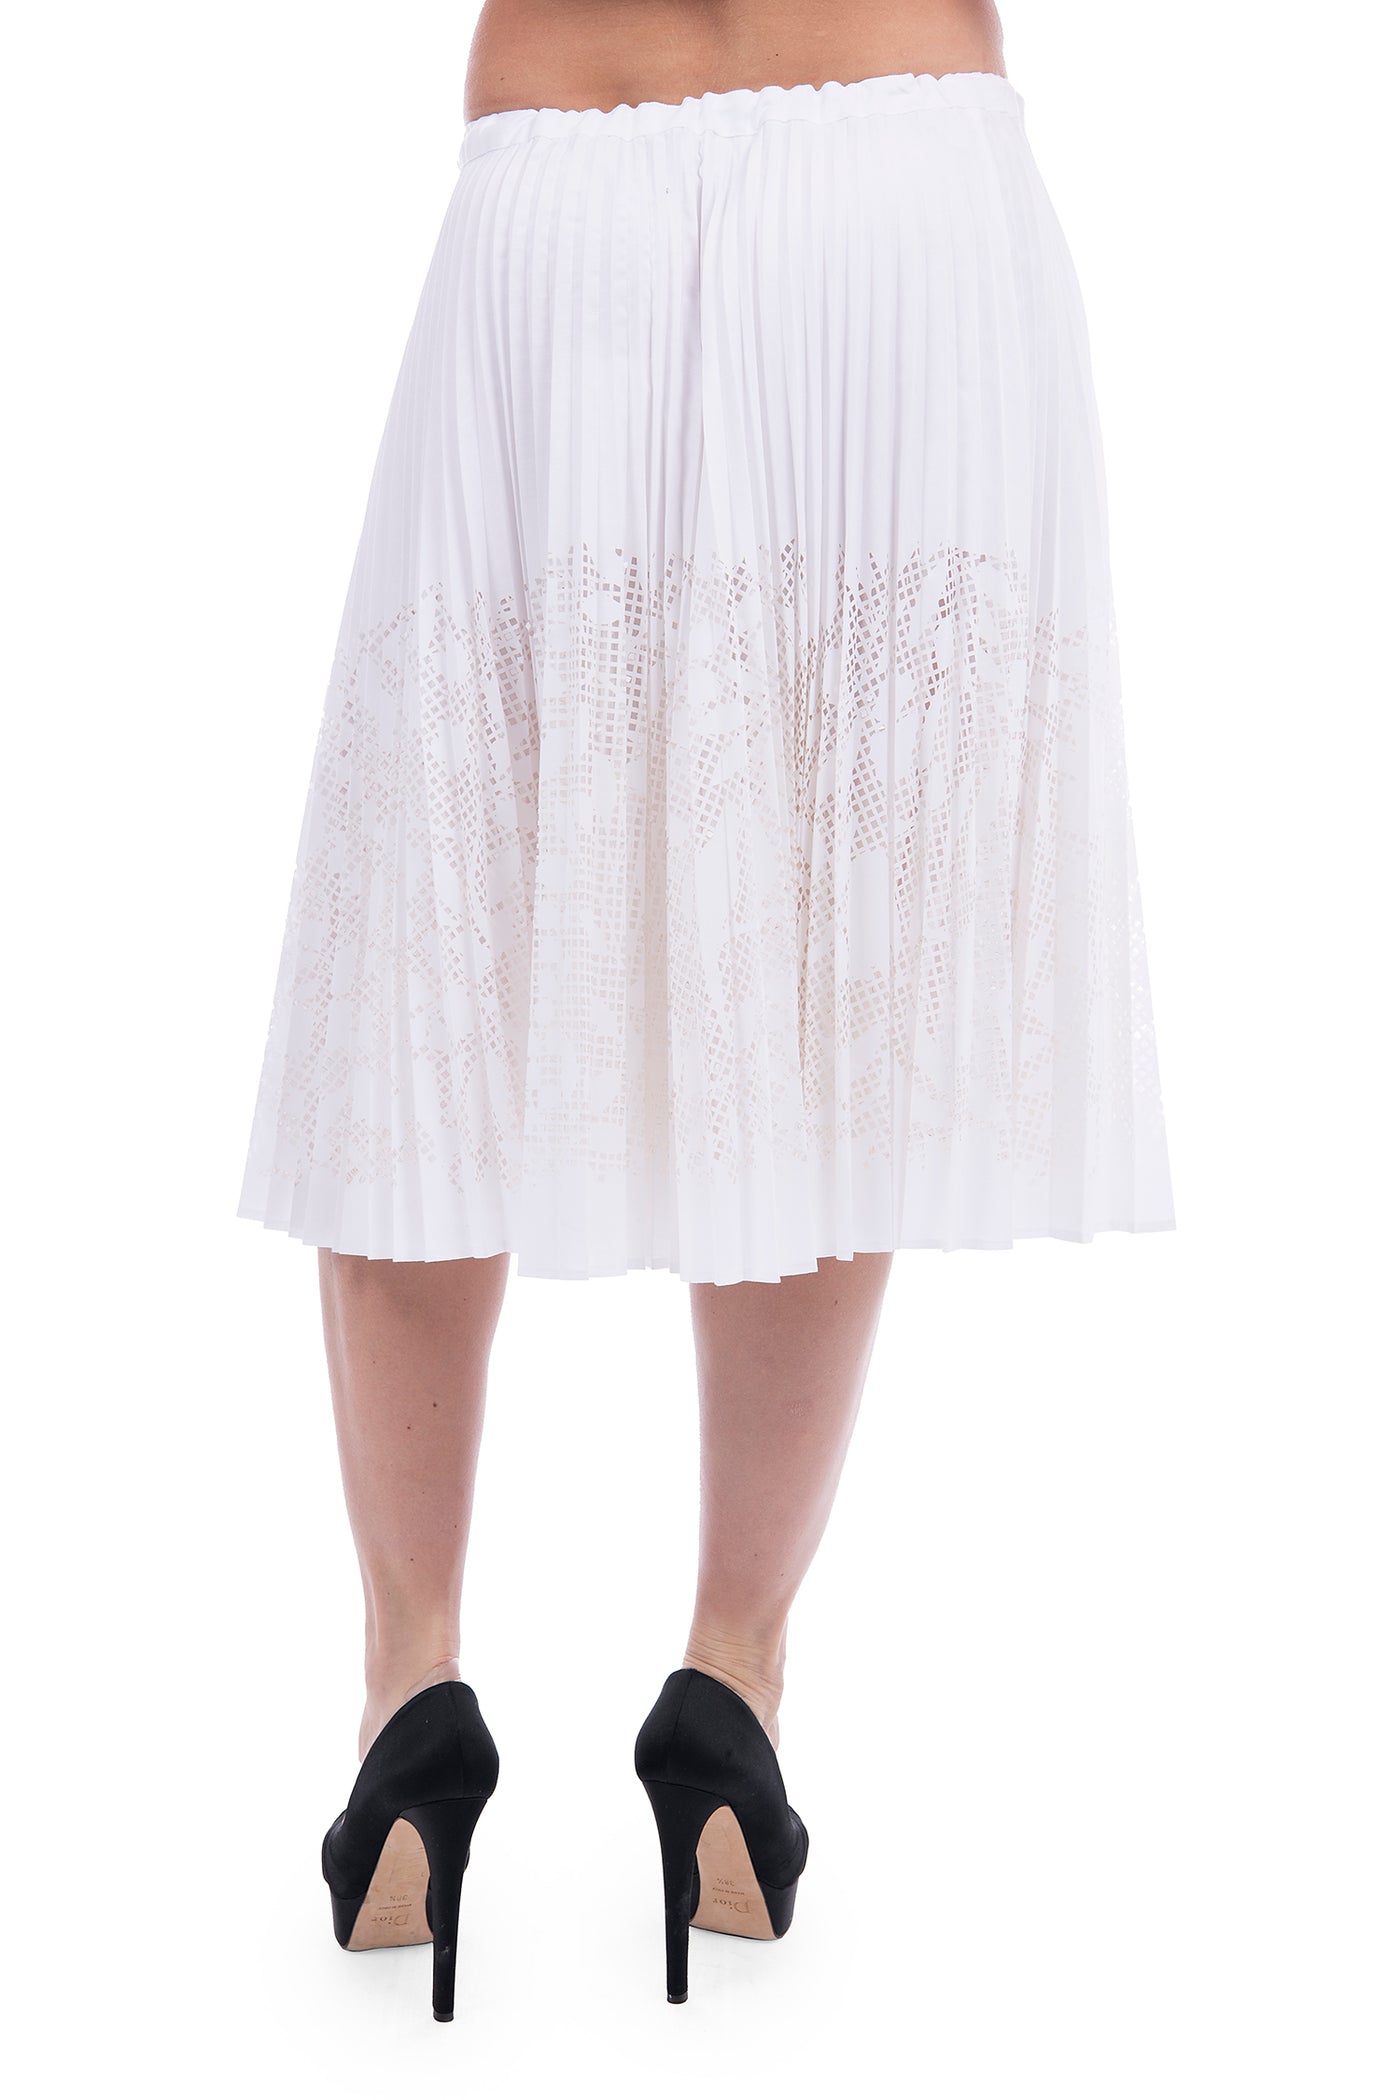 Veronique Branquinho white pleated skirt with laser cutouts